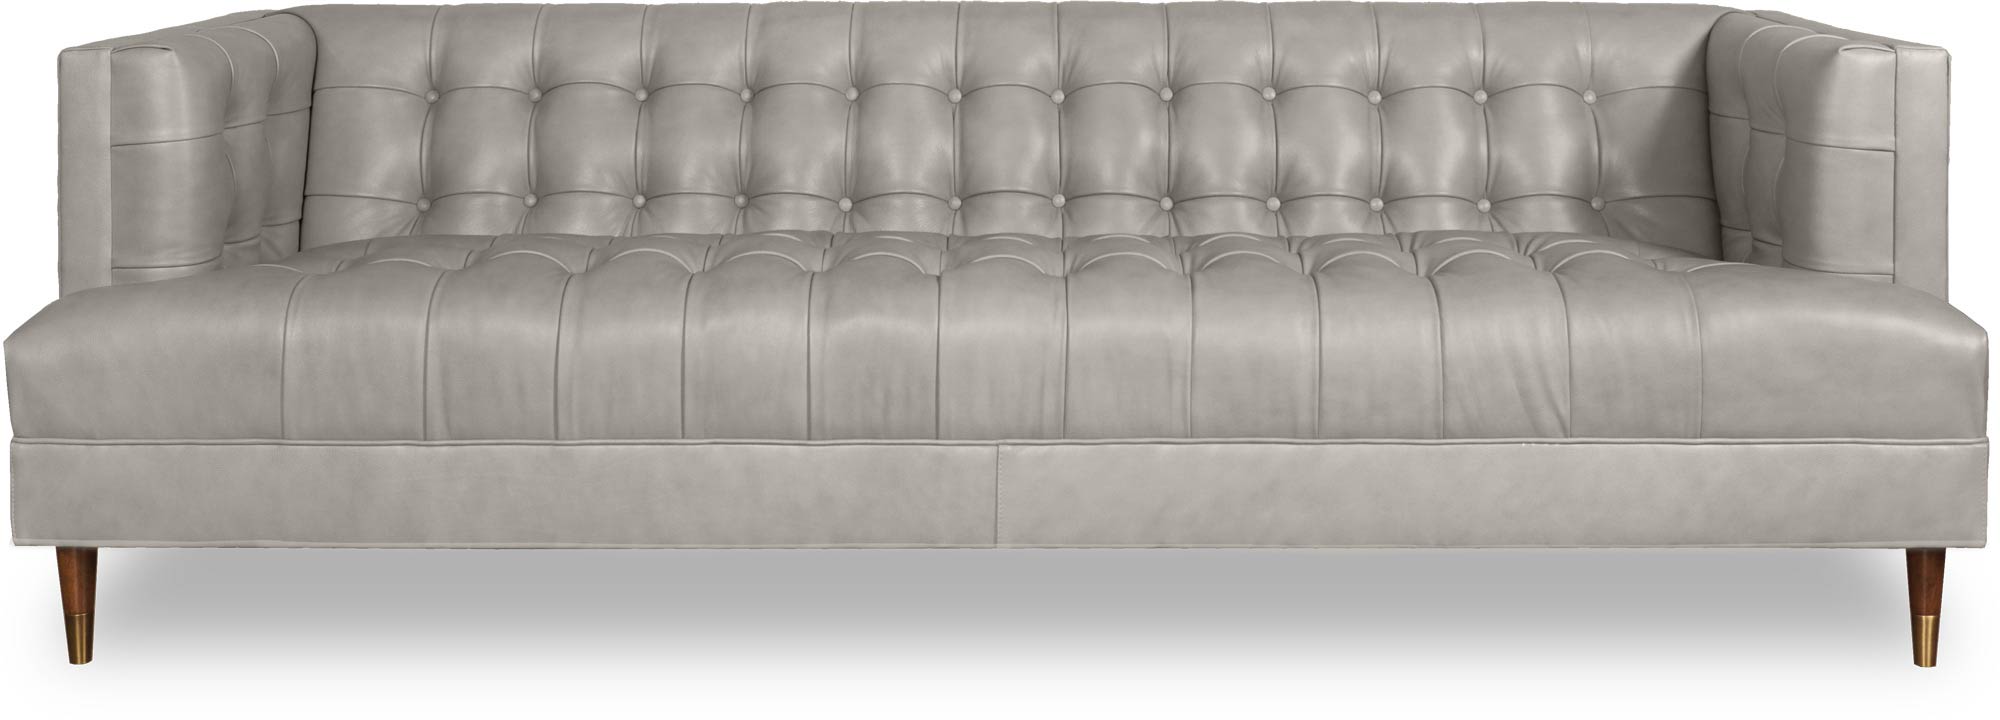 93 Dolly sofa in Bristol Pebble leather